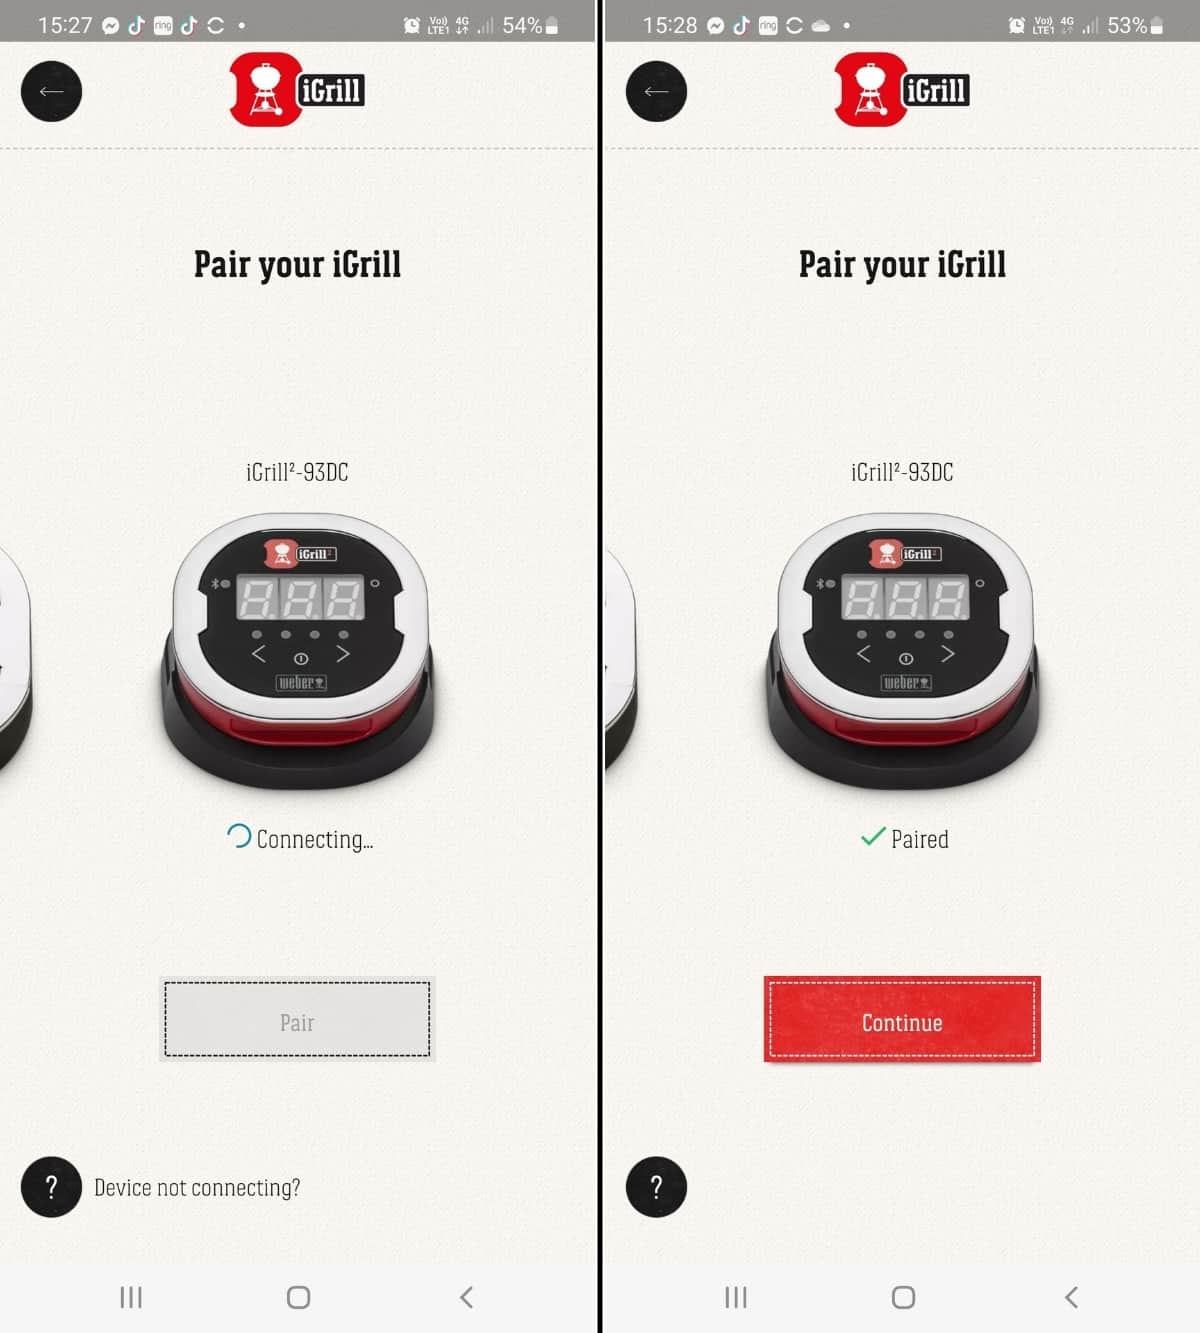 iGrill smartphone app screenshots showing connecting to an iGrill2 thermometer.